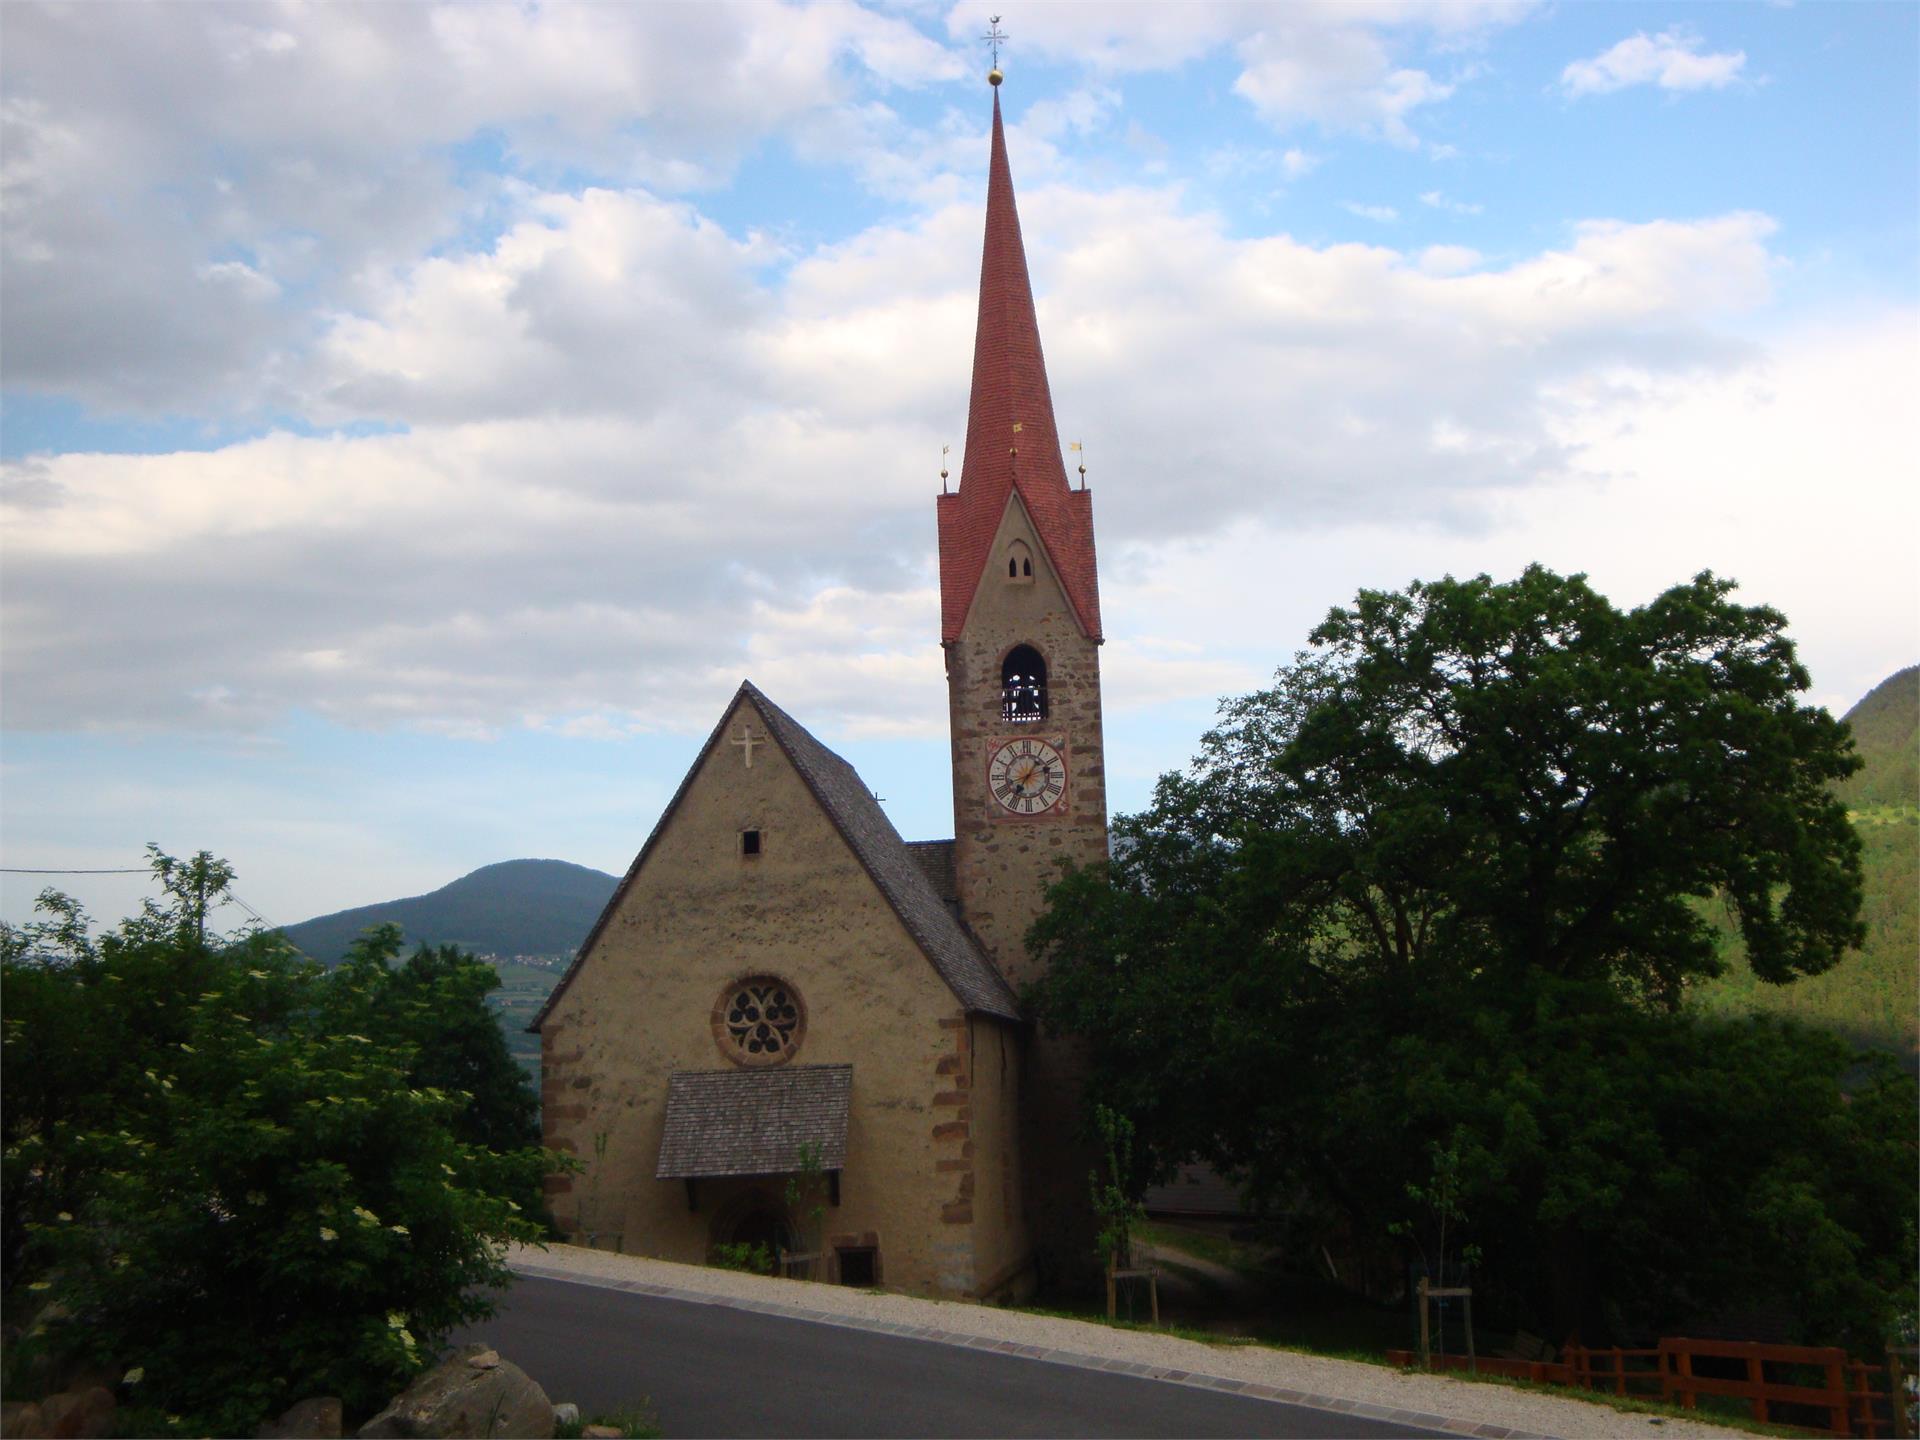 The church of St. Ingenuin and Albuin in Saubach